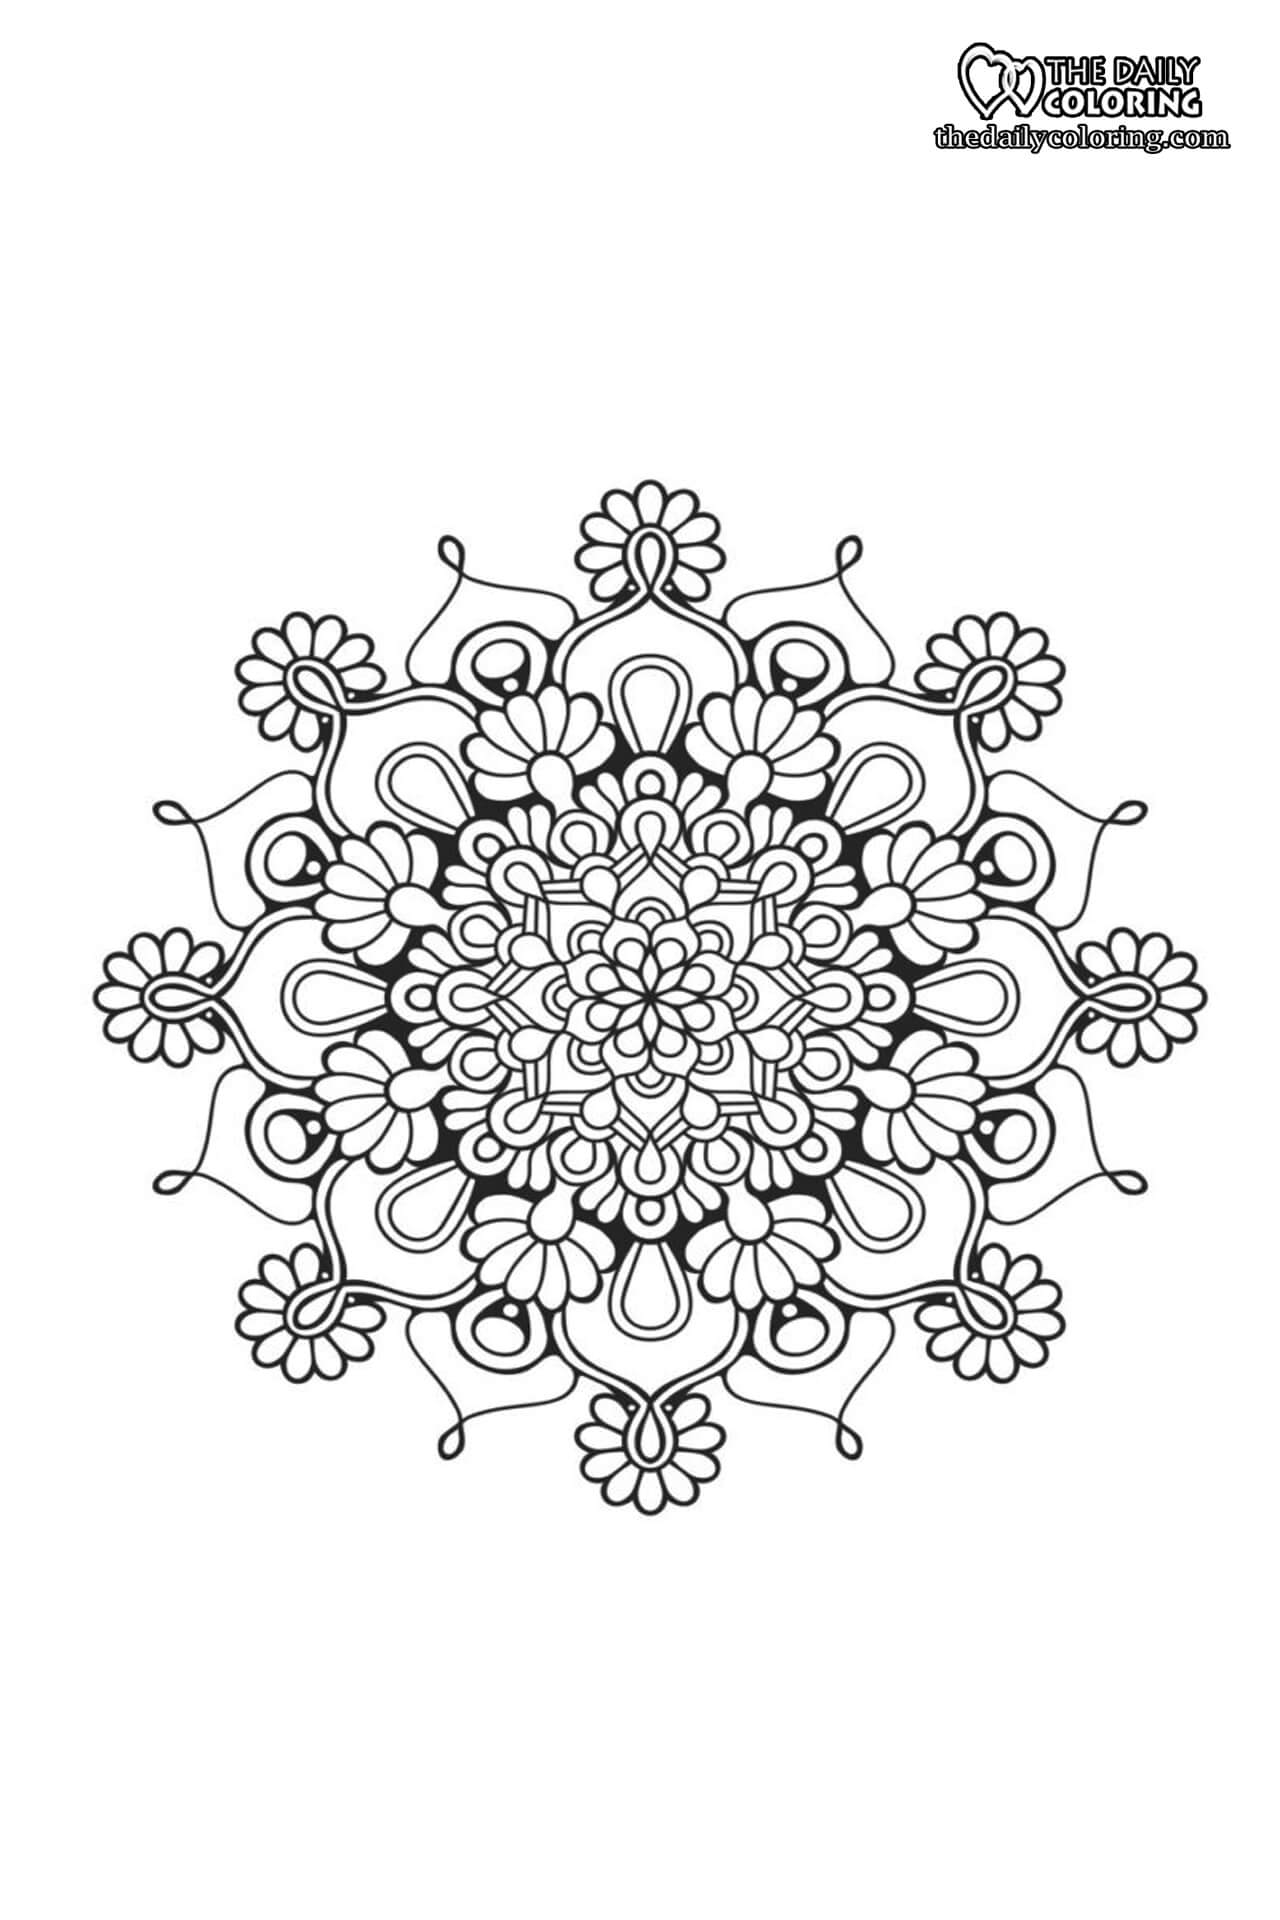 Easy Mandala Coloring Pages   The Daily Coloring